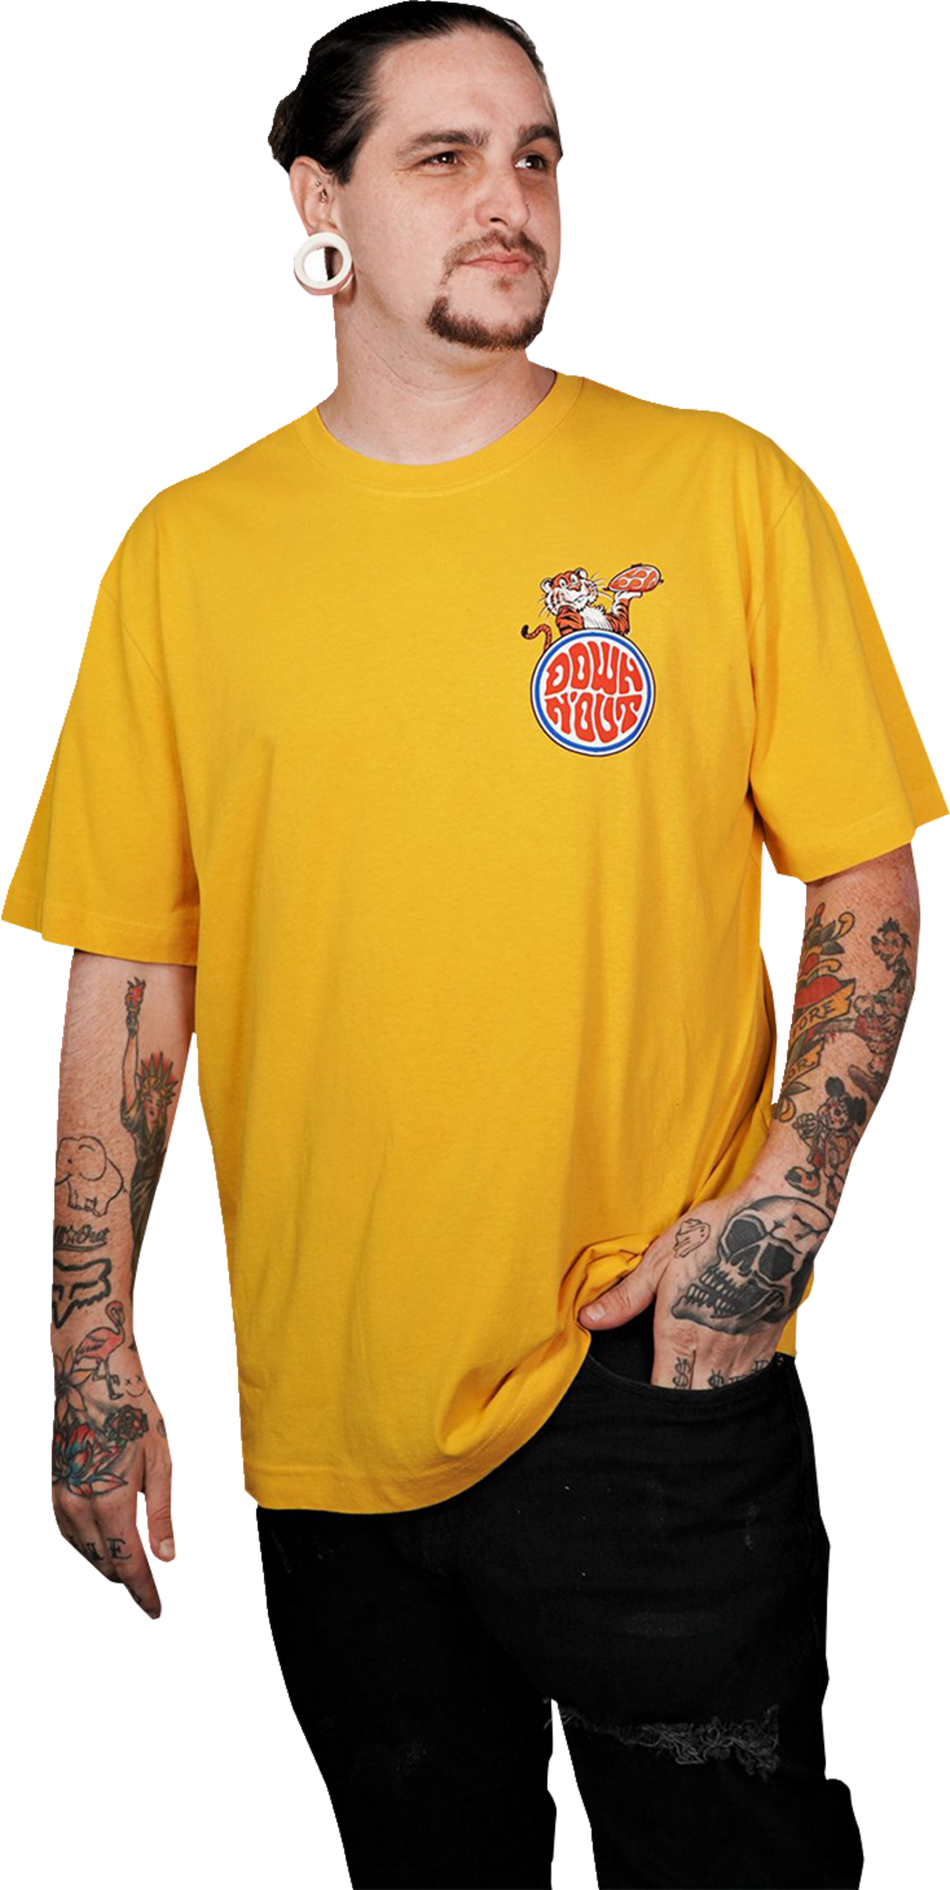 LETHAL THREAT Down-N-Out Tiger in Your Tank - Yellow - XL DT10051XL